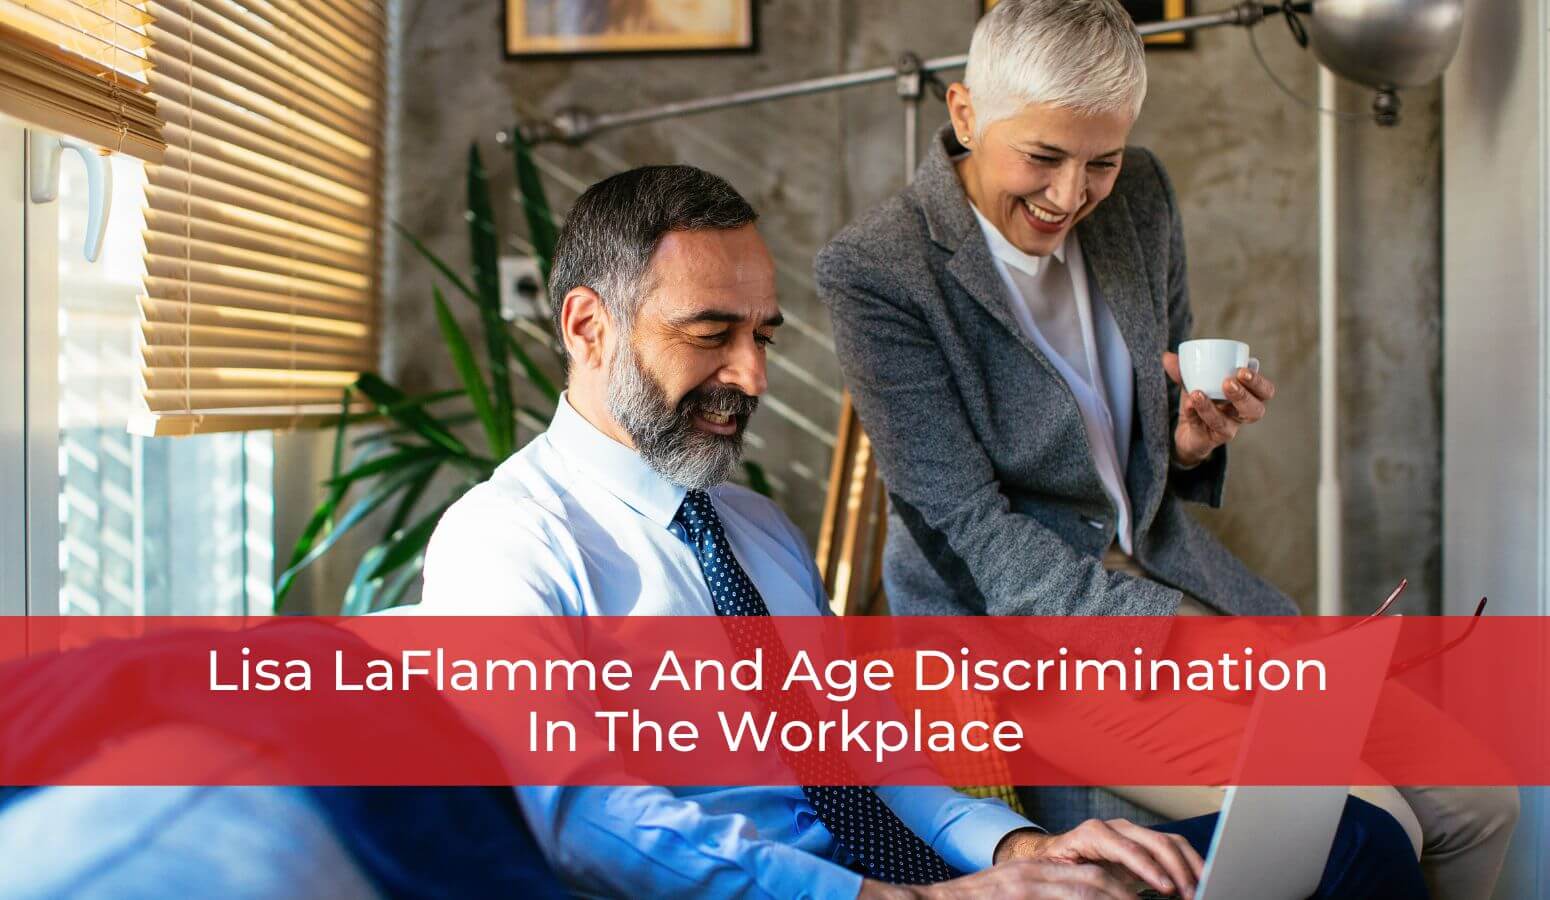 Featured image for “Lisa LaFlamme And Age Discrimination In The Workplace”